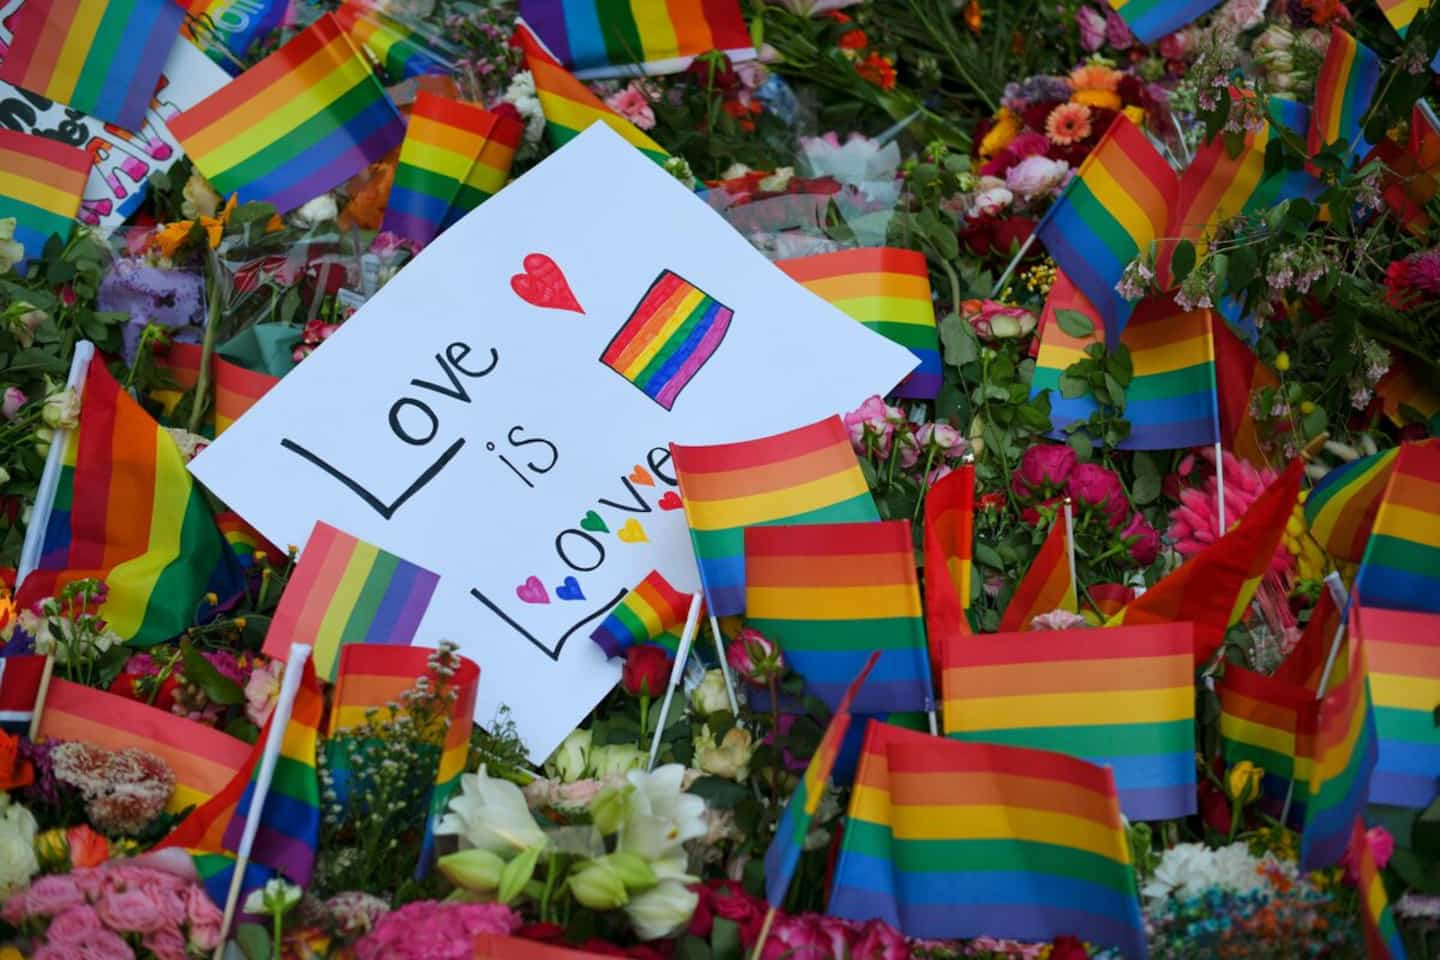 Norway celebrates rainbow love in the aftermath of the Oslo shootings